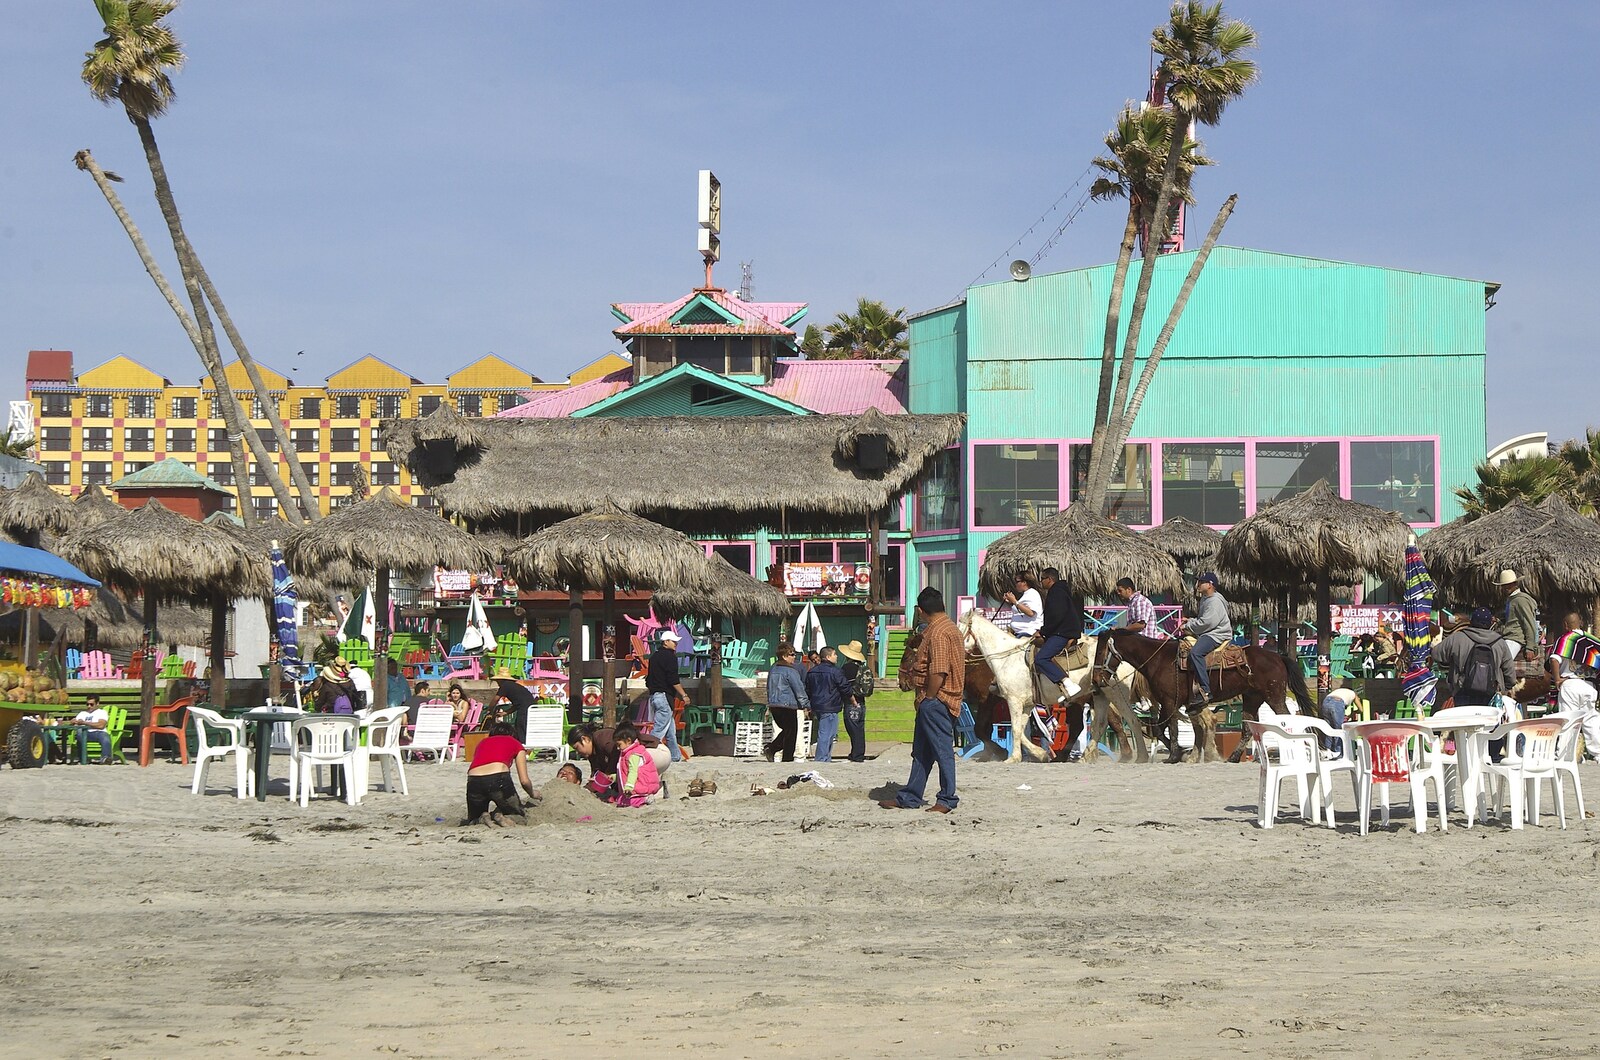 Lurid buildings on the beach from Rosarito and Tijuana, Baja California, Mexico - 2nd March 2008